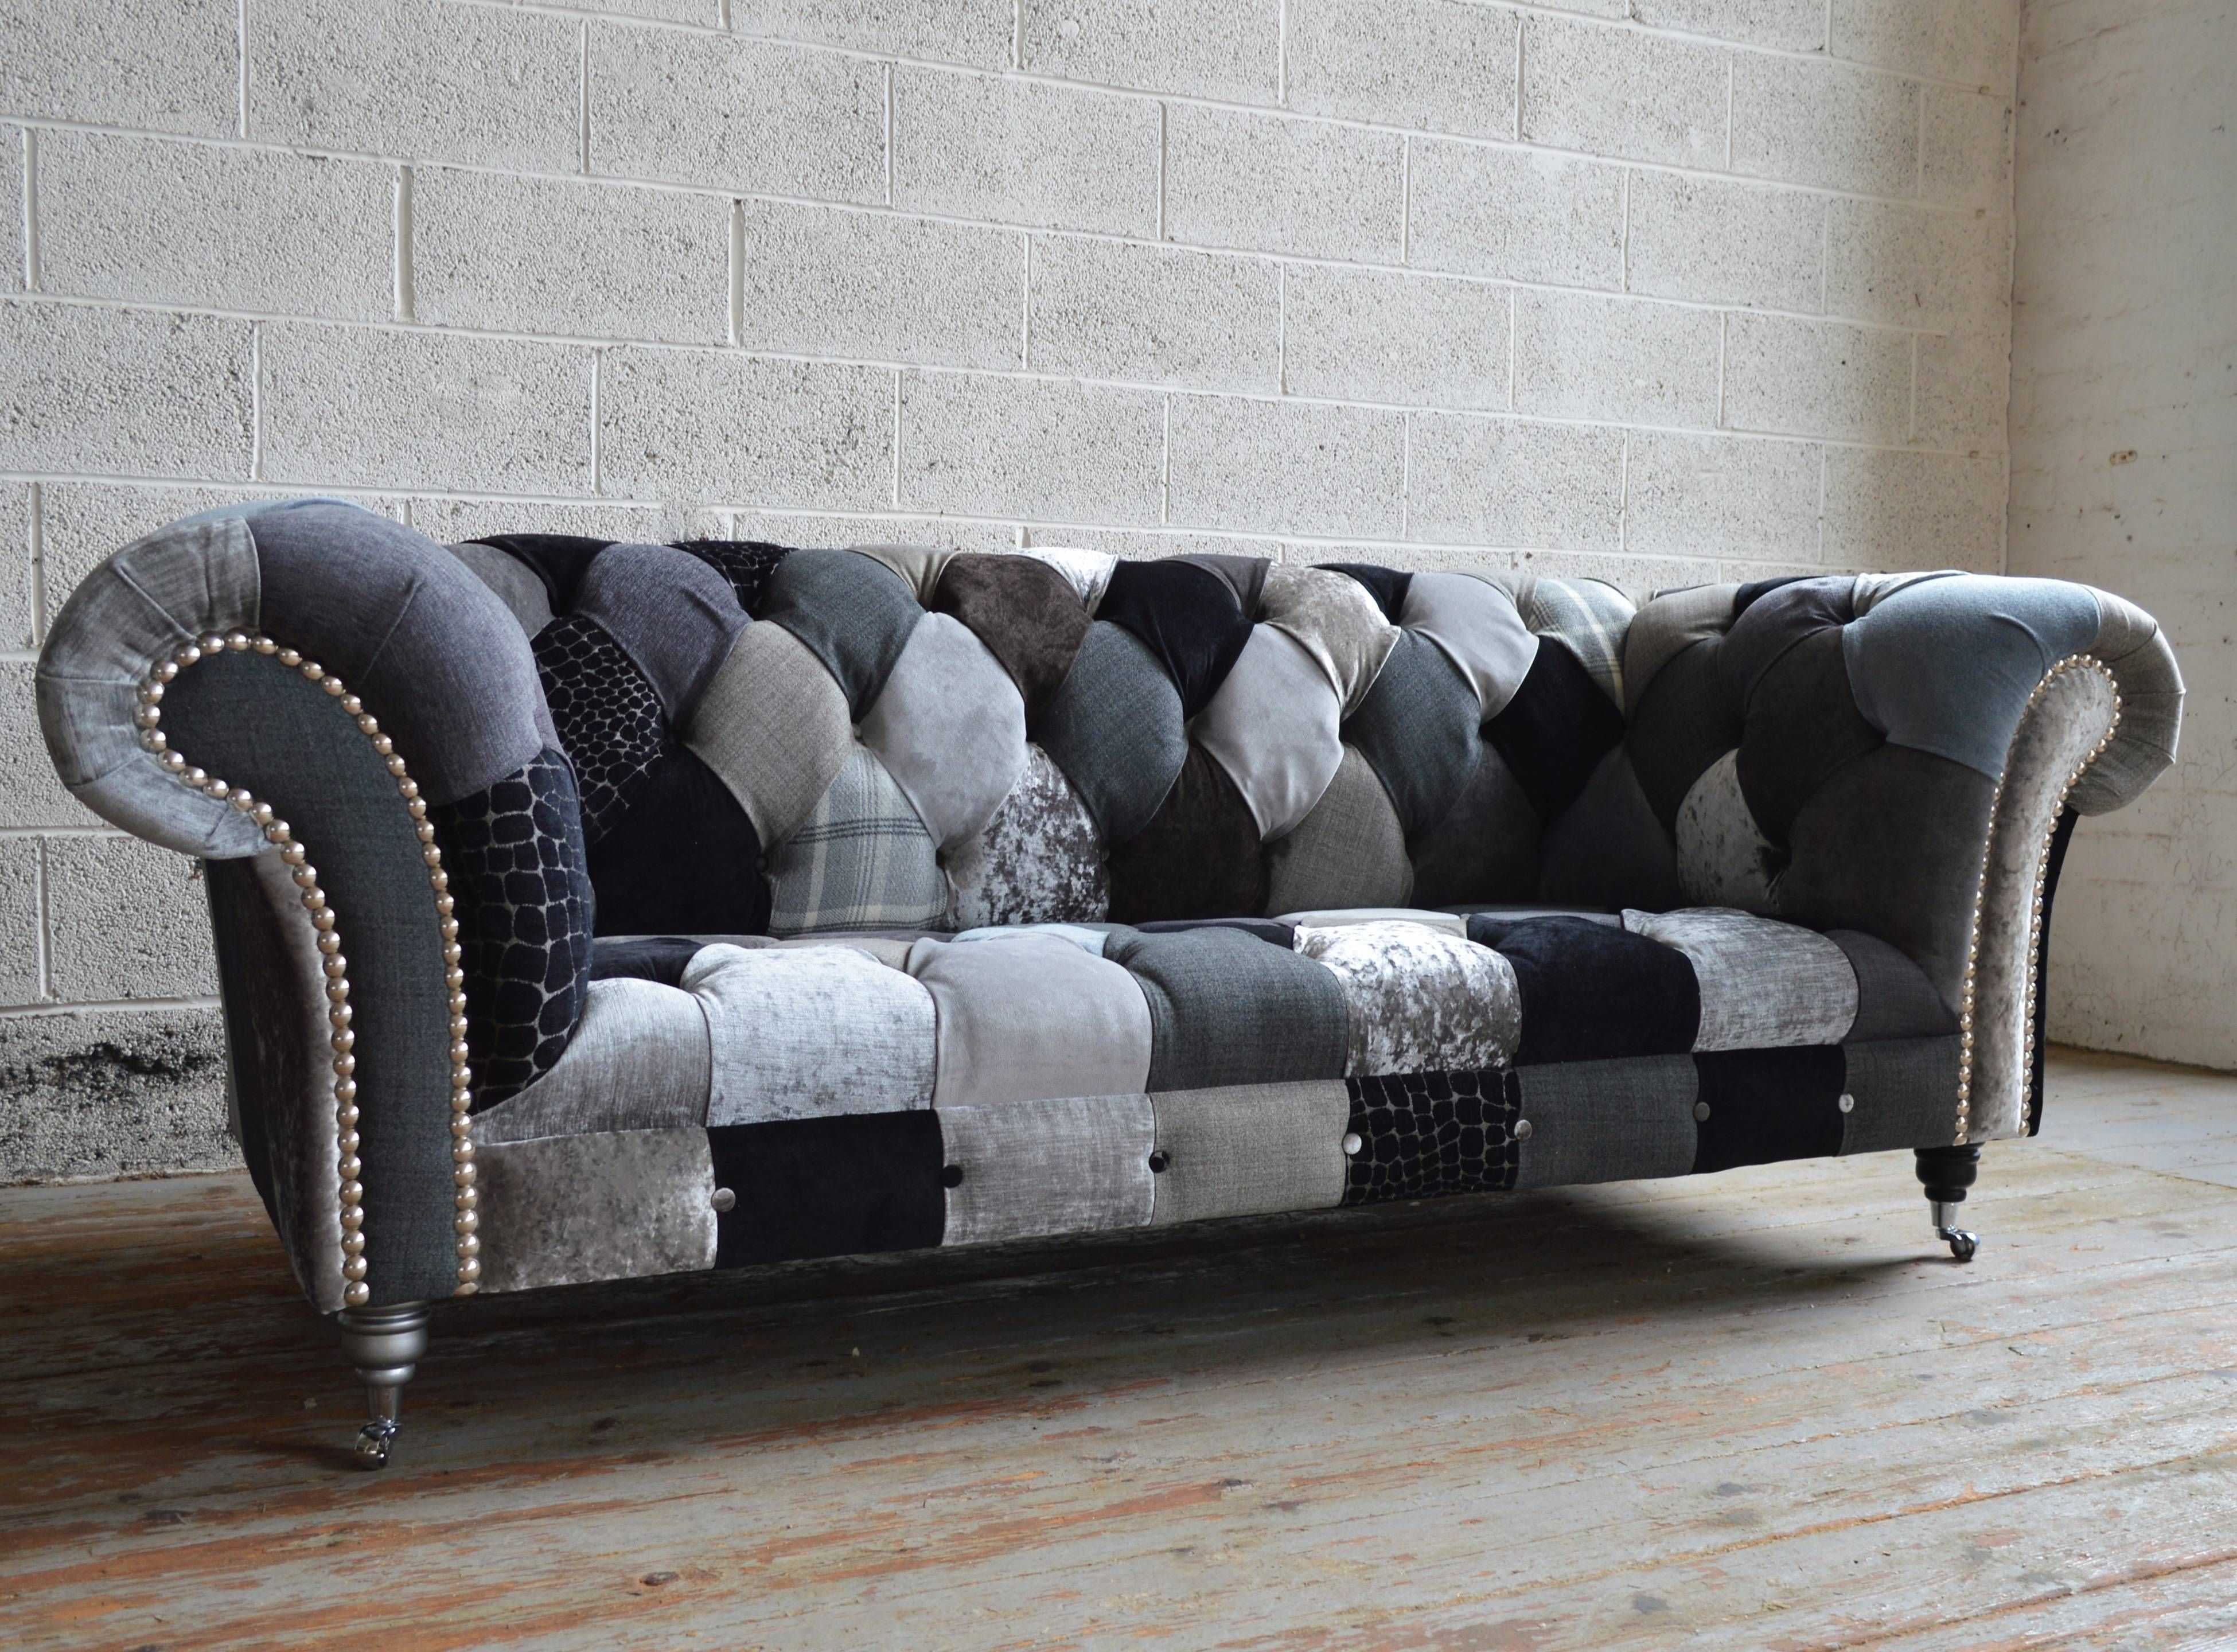 Chester Patchwork Chesterfield Sofa | Abode Sofas Regarding Chesterfield Furniture (View 11 of 30)